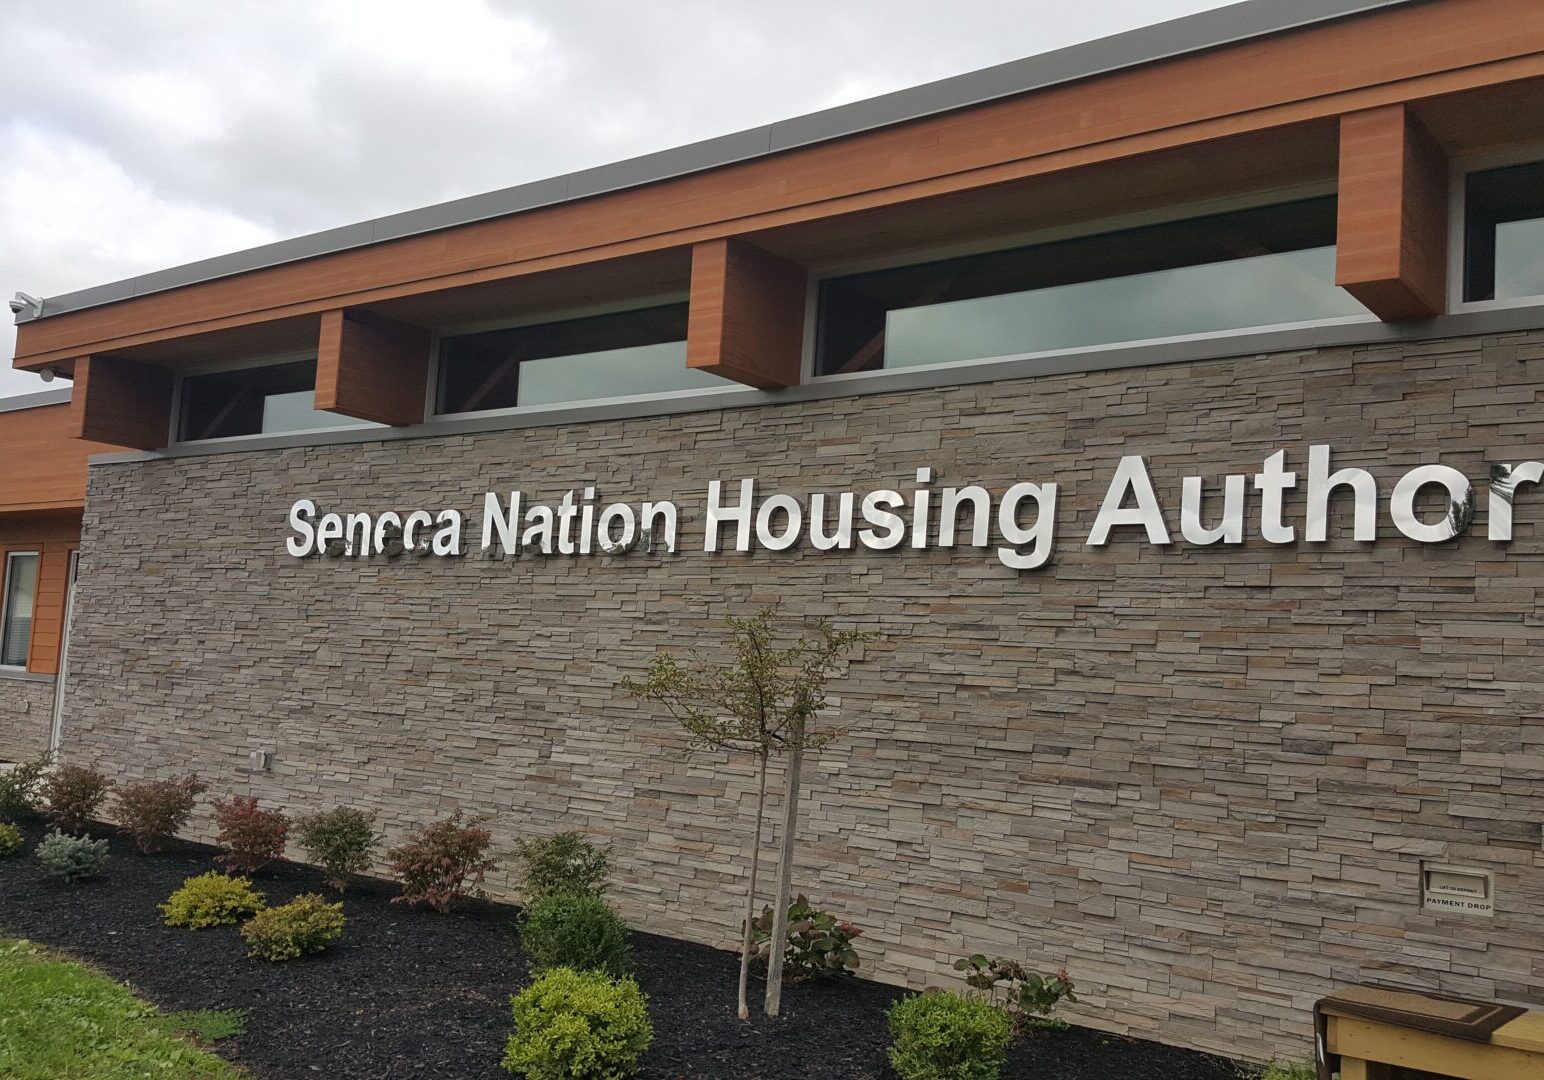 Exterior of the seneca nation housing authority building with stone facade and signage.